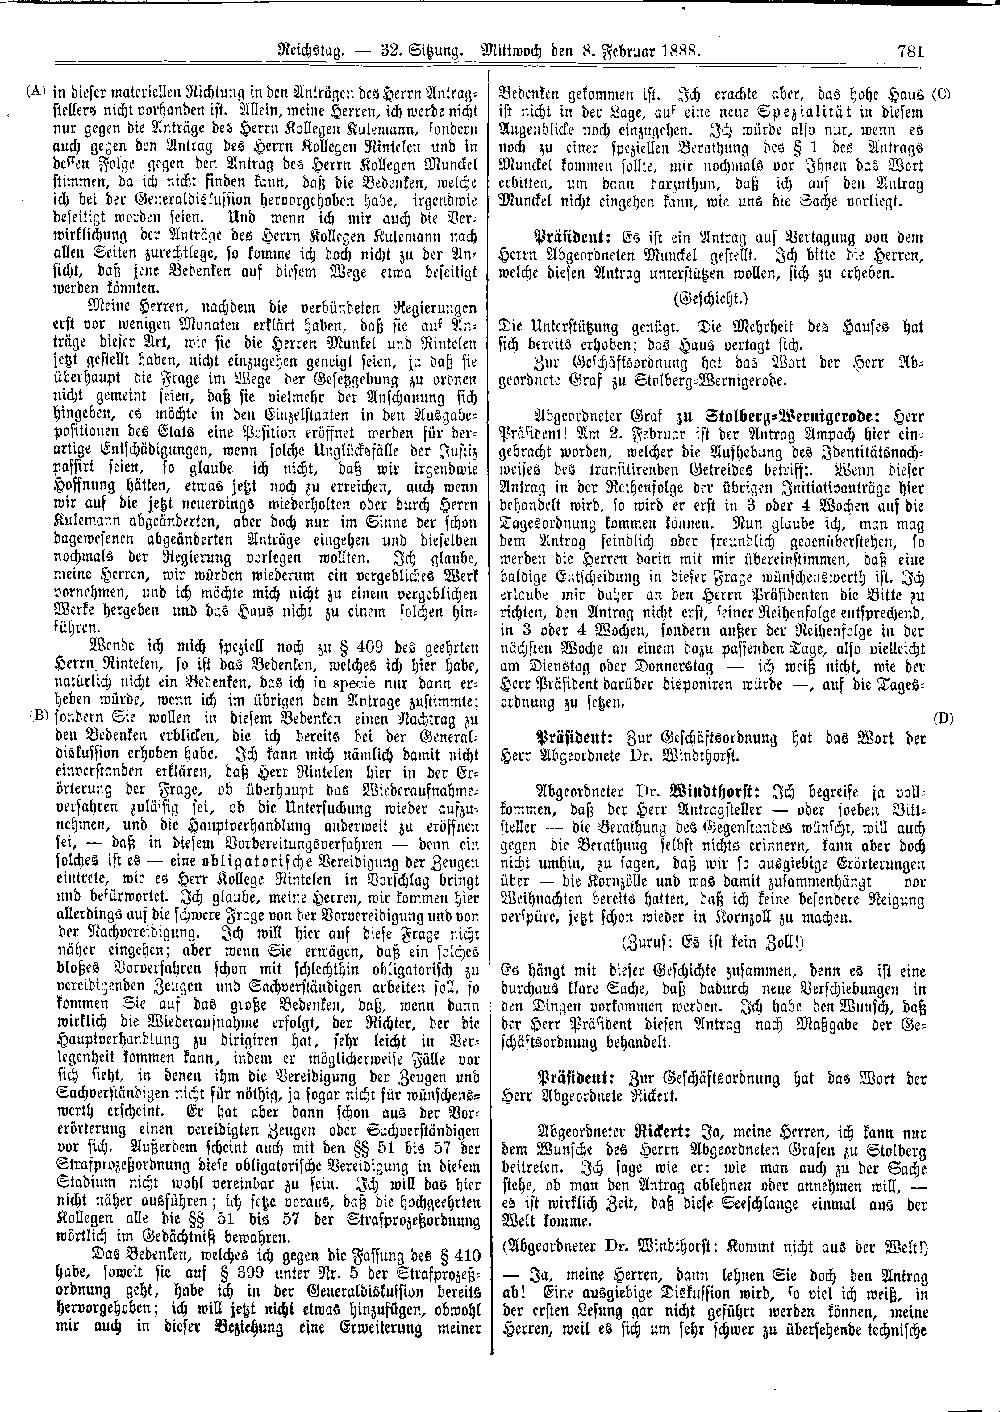 Scan of page 781